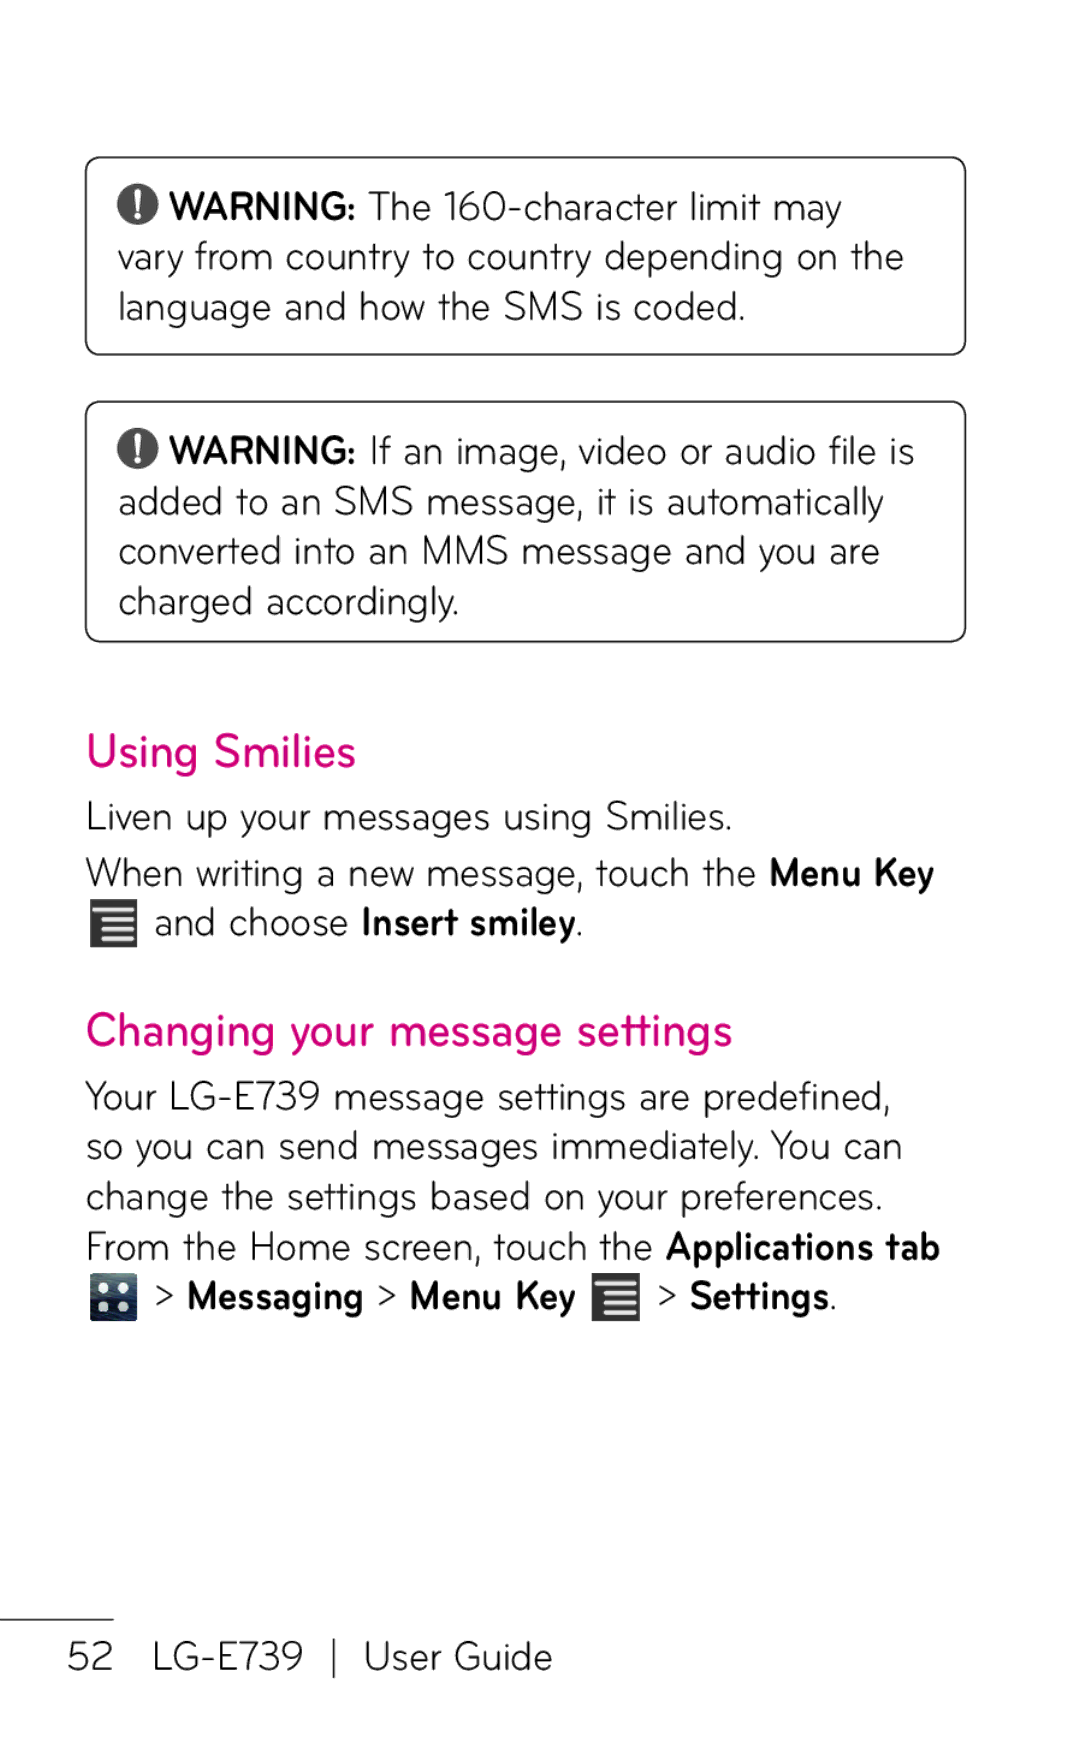 LG Electronics E739 manual Using Smilies, Changing your message settings, From the Home screen, touch the Applications tab 